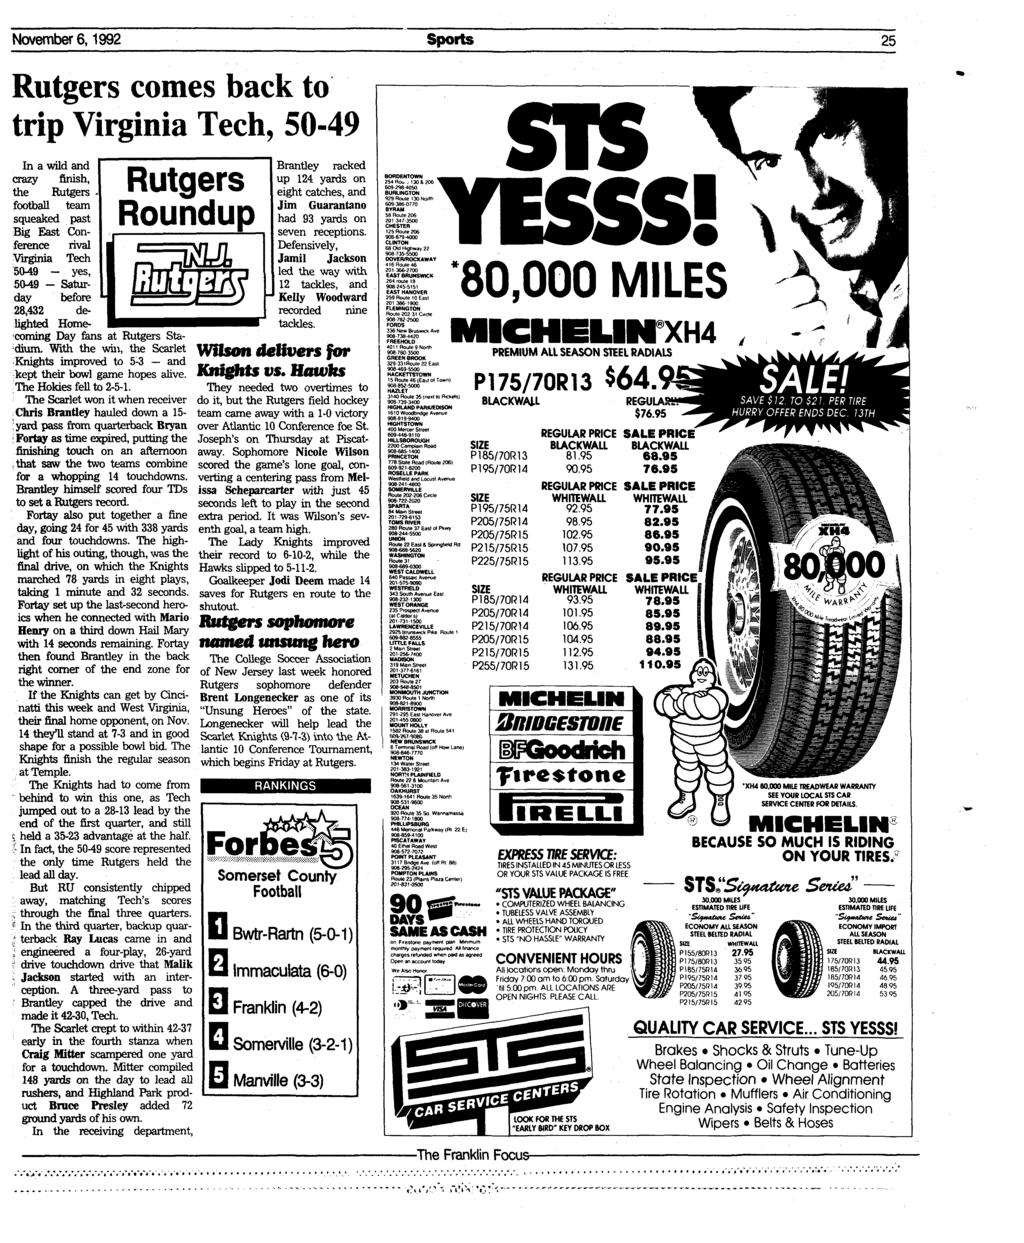 November 6, 1992 Sports 25 Rutgers comes back to trip Virginia Tech, 50-49 Rutgers Roundup In a wild and crazy finish, the Rutgers football team squeaked past Big East Conference rival Virginia Tech